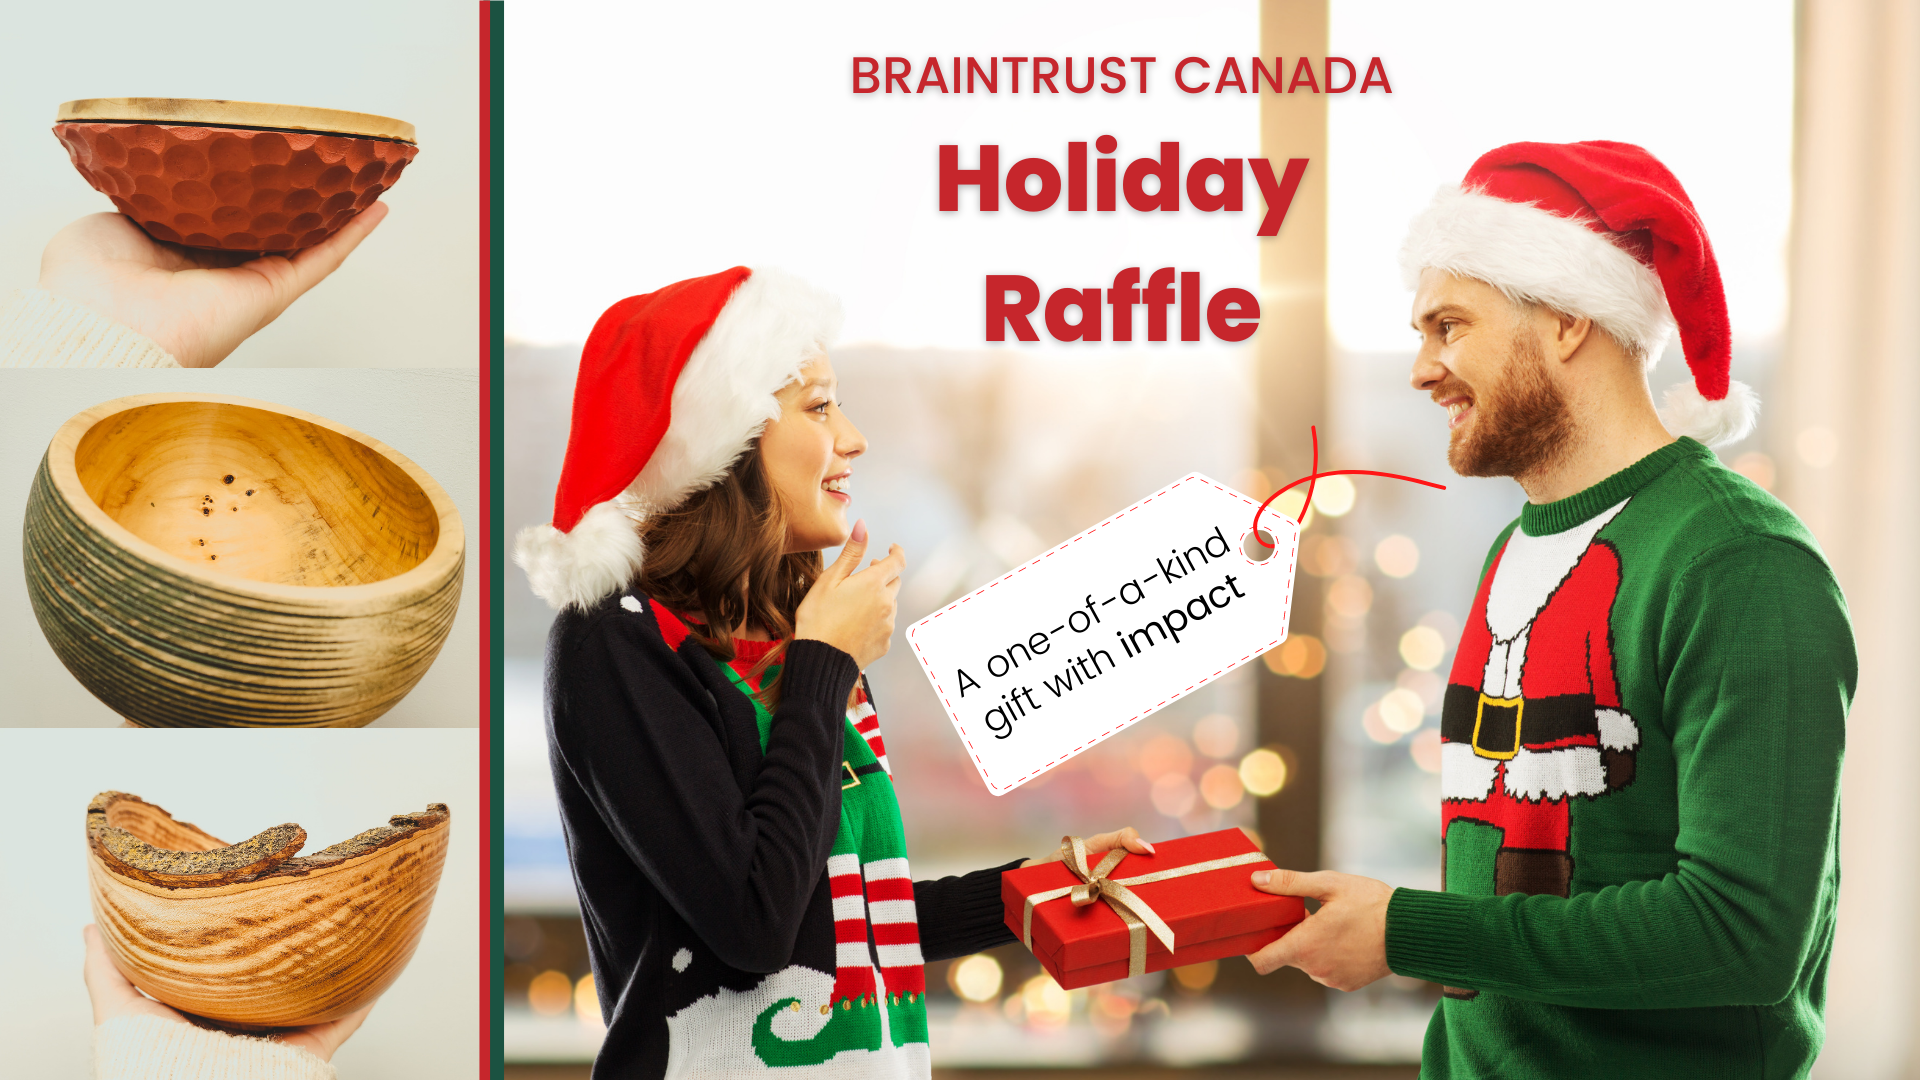 BrainTrust Canada Holiday Raffle. Gift tag reads A one-of-a-kind gift with impact. Images of handmade bowls and woman handing gift to man.